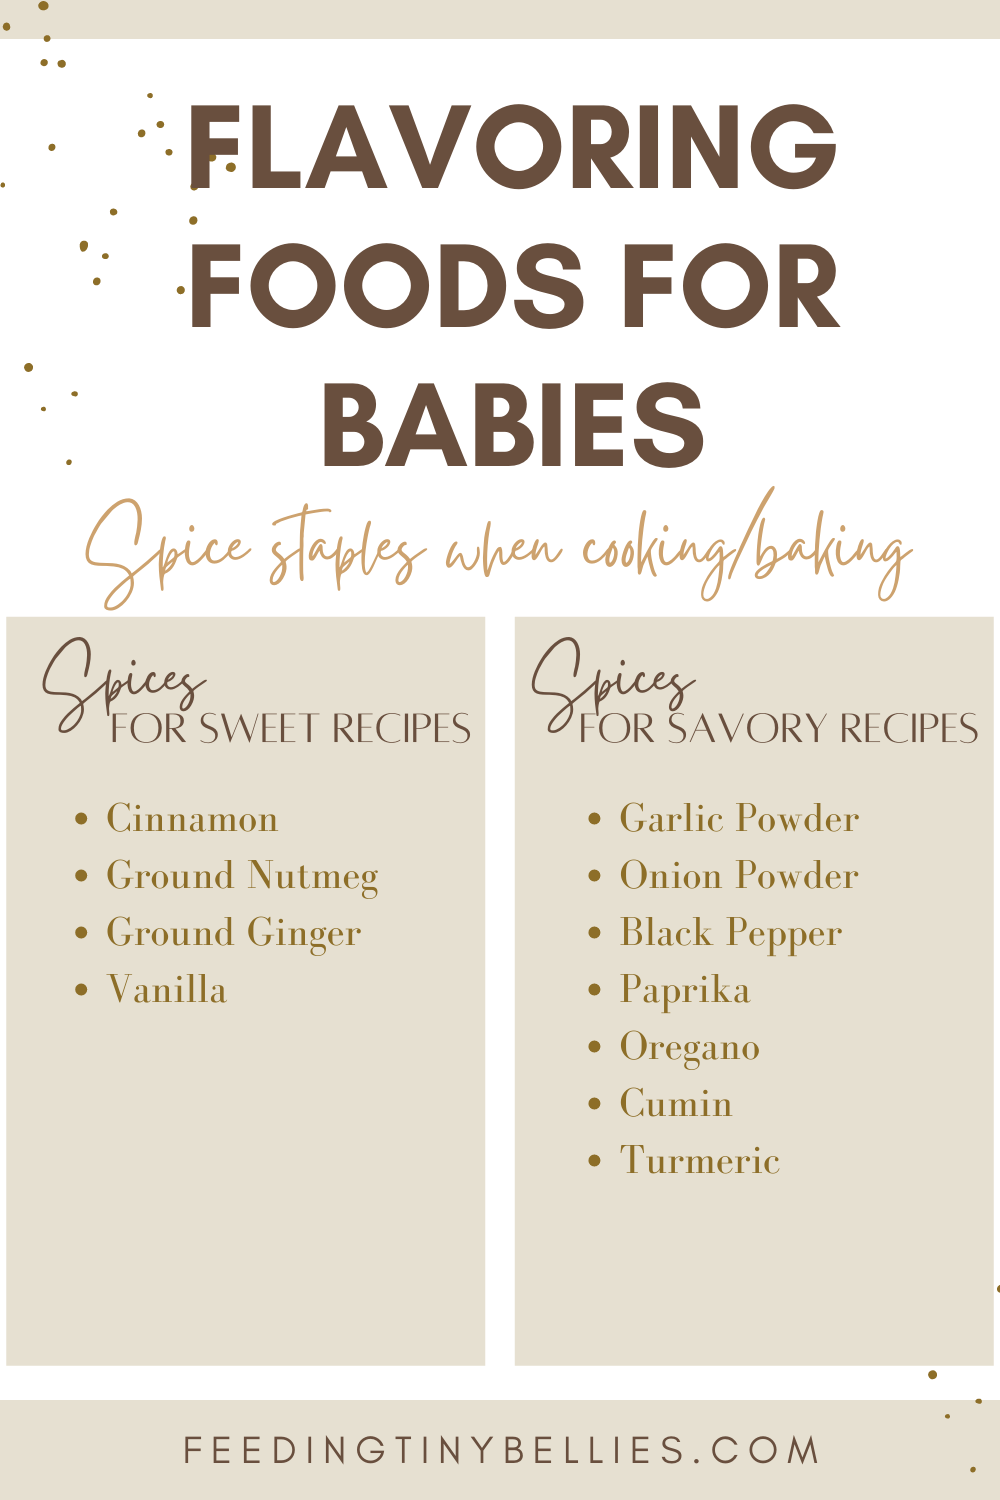 Flavoring foods for babies - Spice staples when cooking/baking